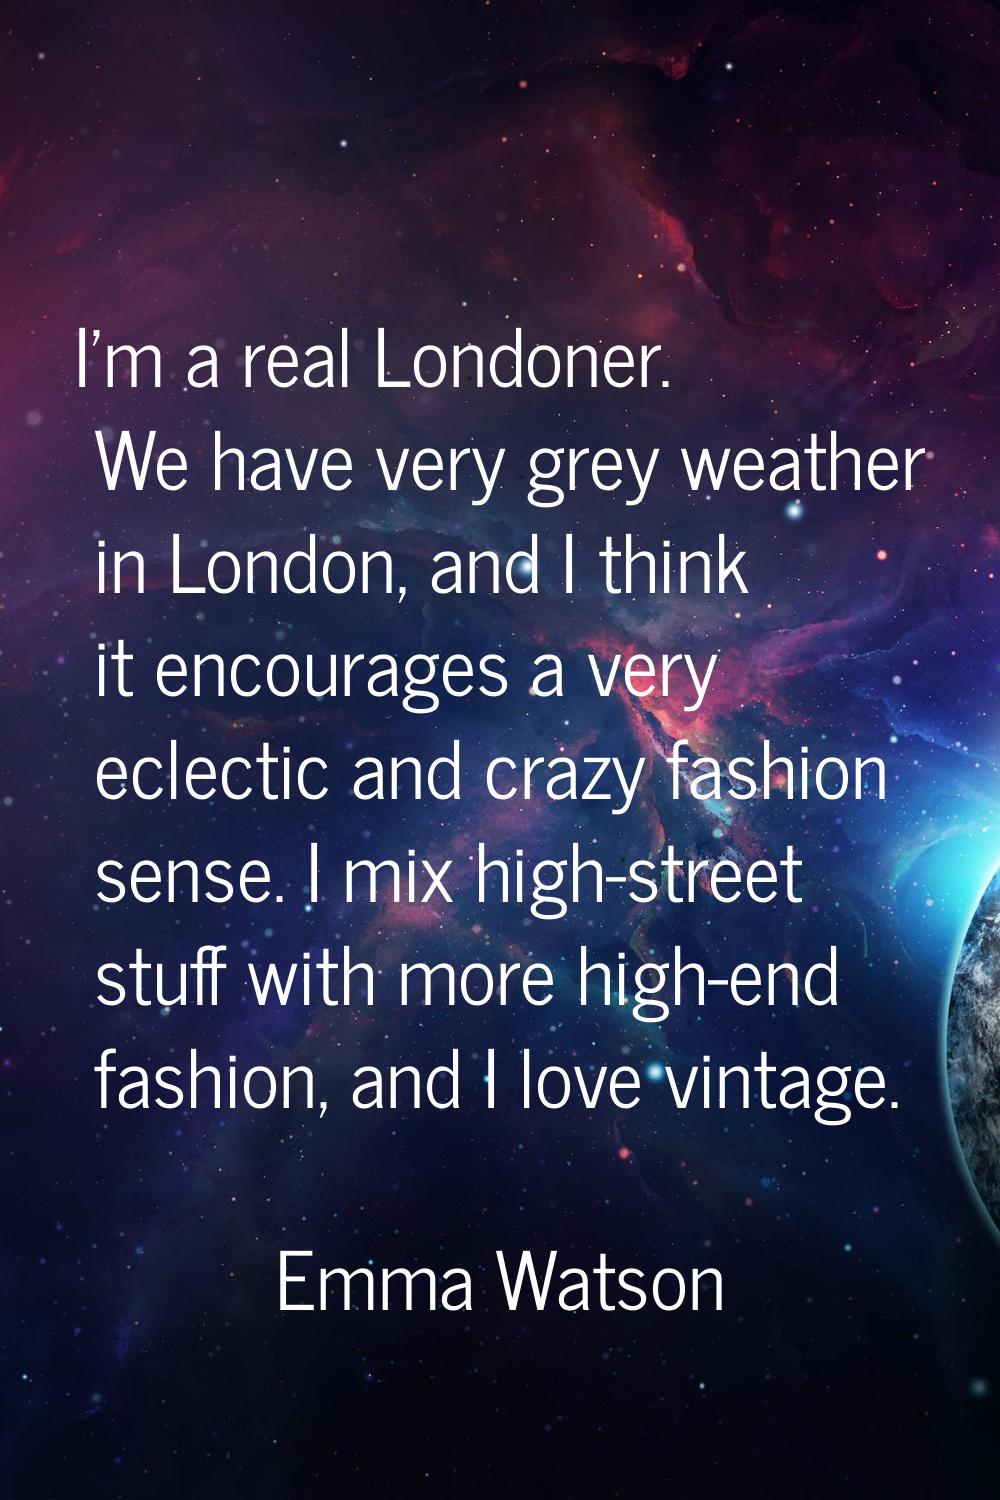 I'm a real Londoner. We have very grey weather in London, and I think it encourages a very eclectic